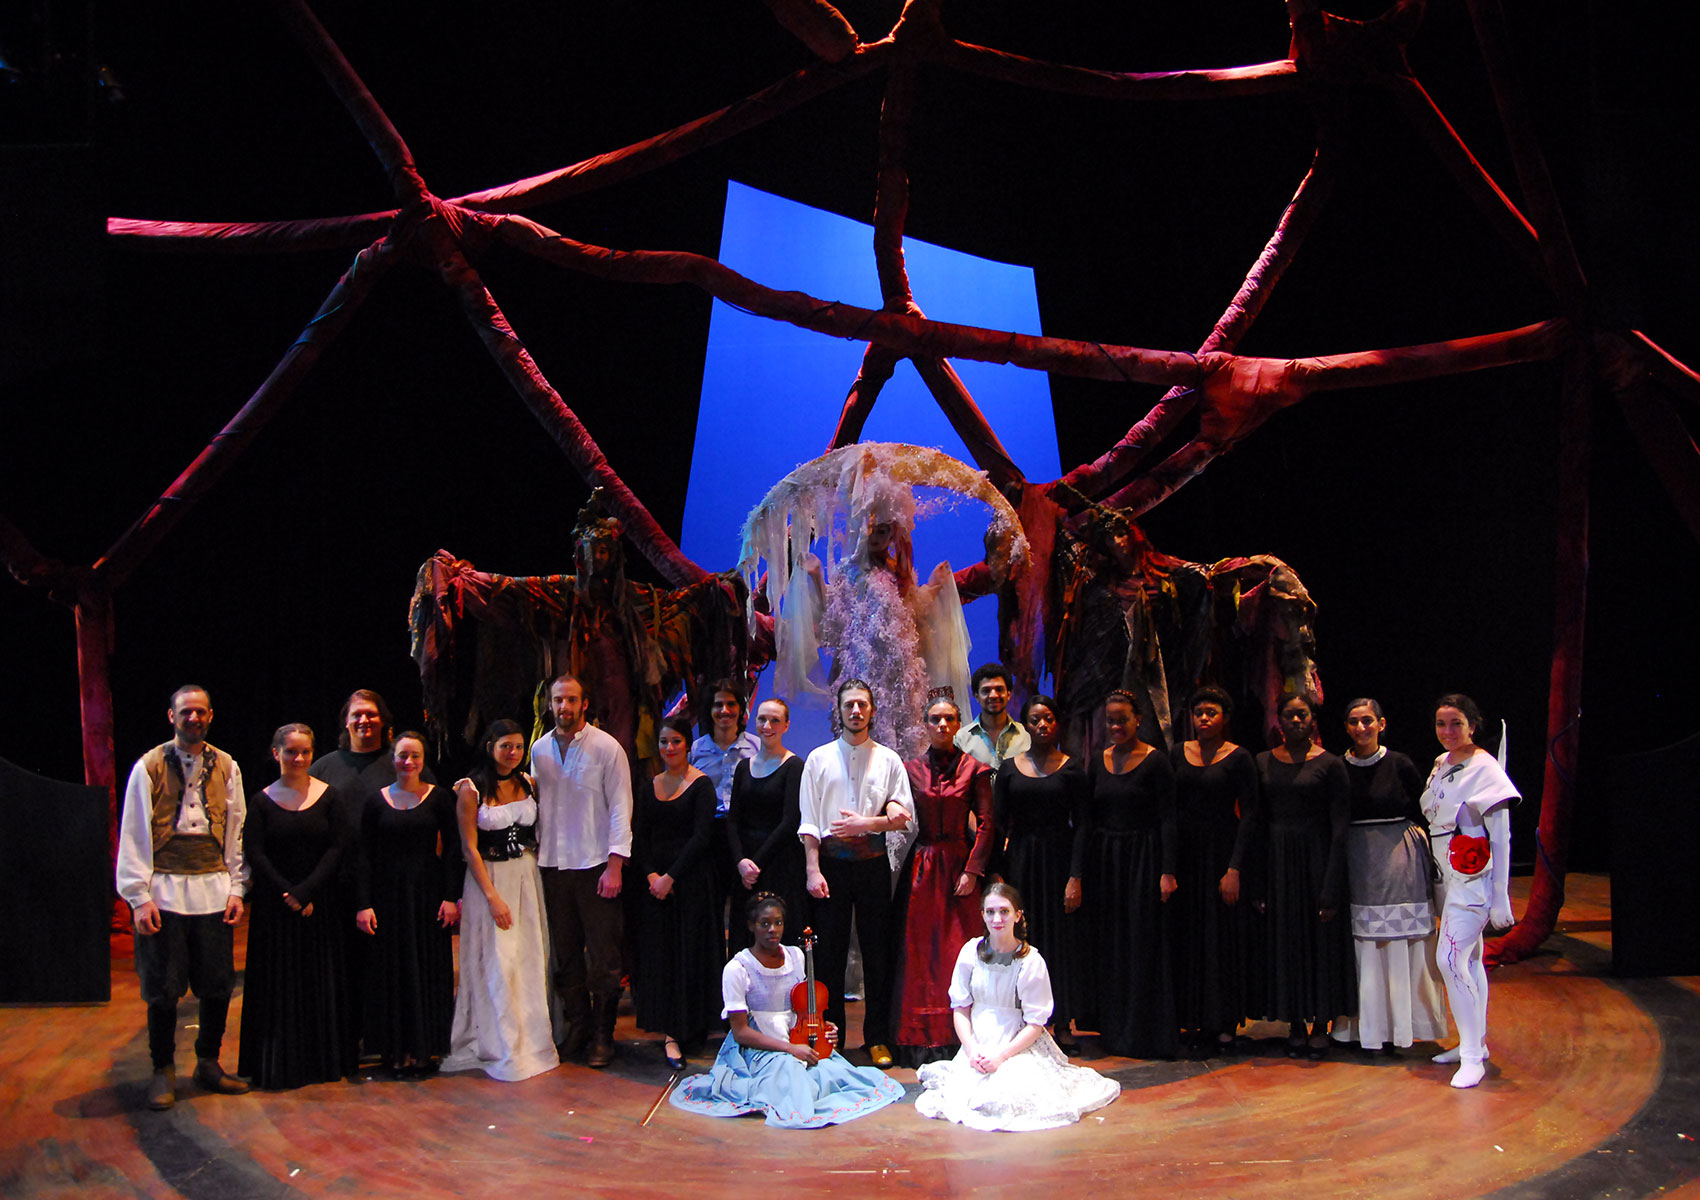 A photo of all the cast onstage in their costumes.